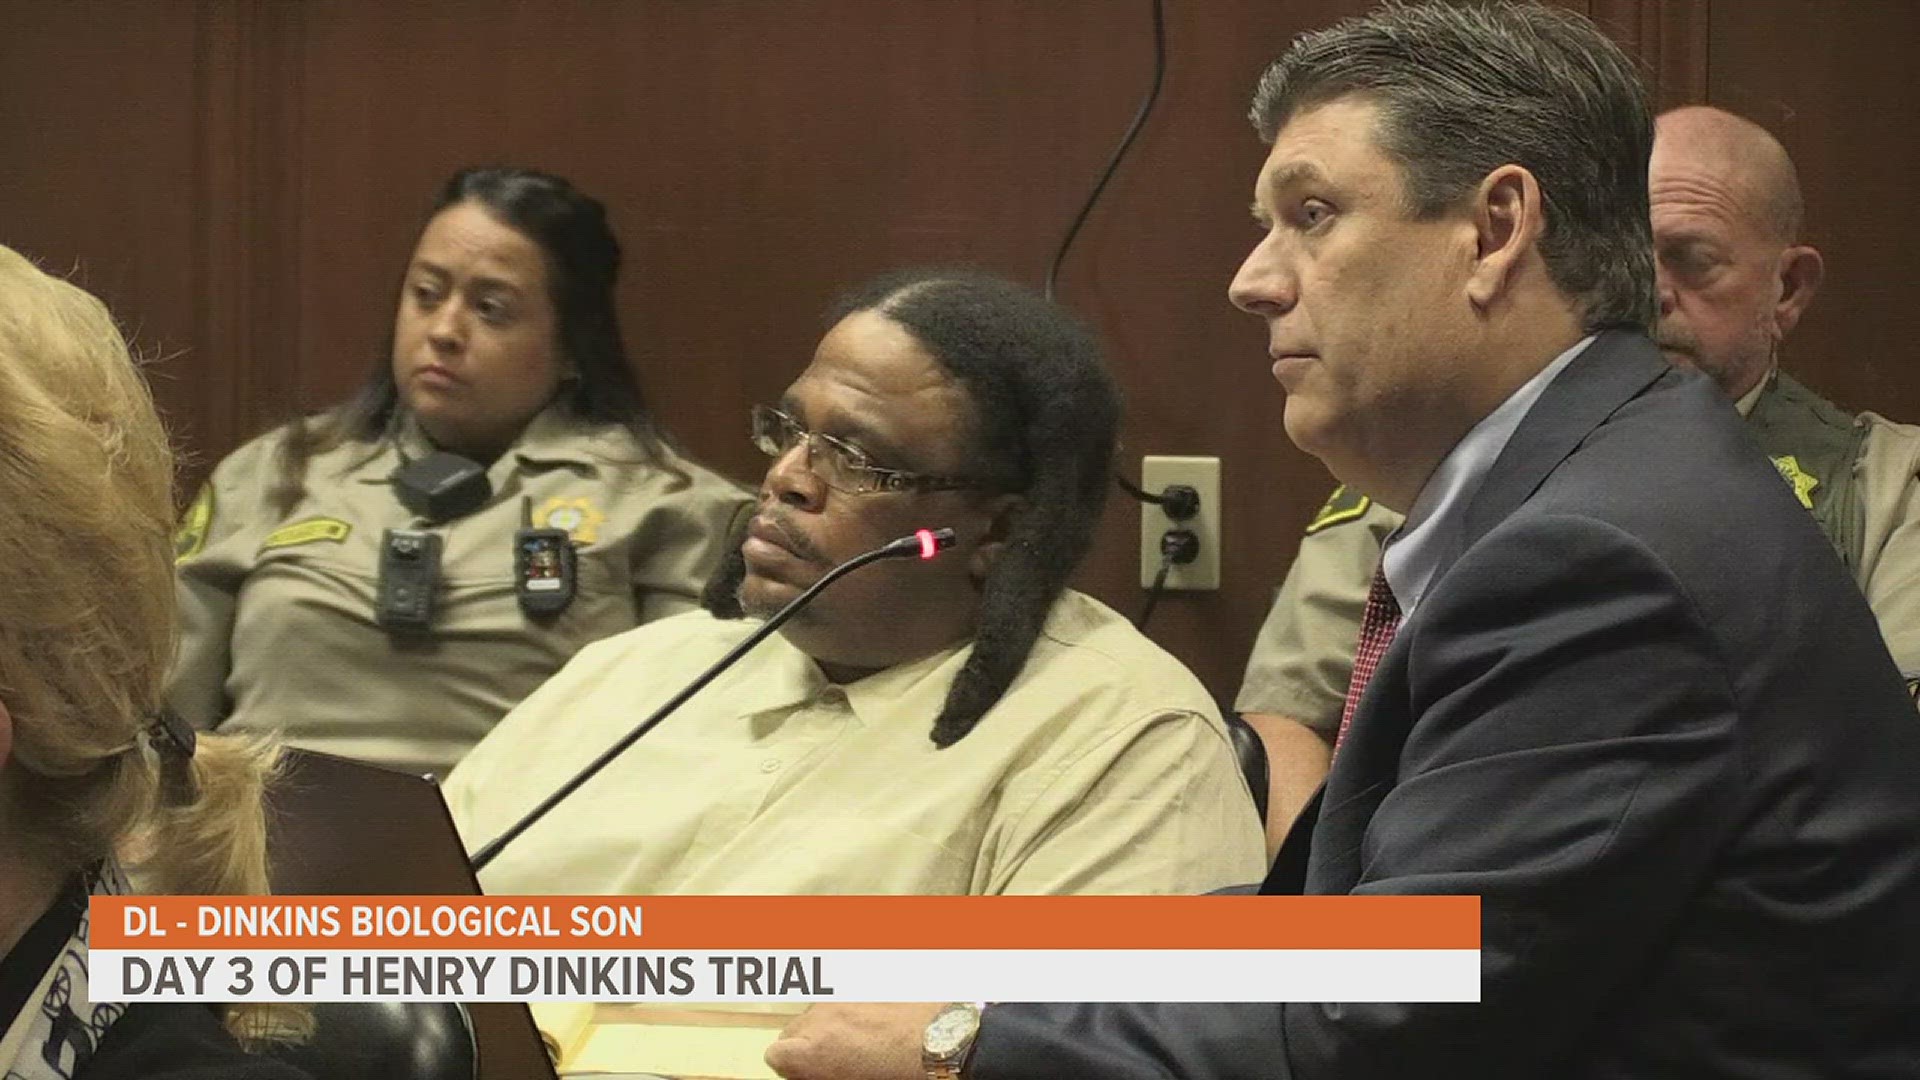 In the third day of the Henry Dinkins' trial, we've heard from Dinkins son and are currently hearing from Breasia's mother. We are livestreaming this on our YouTube.